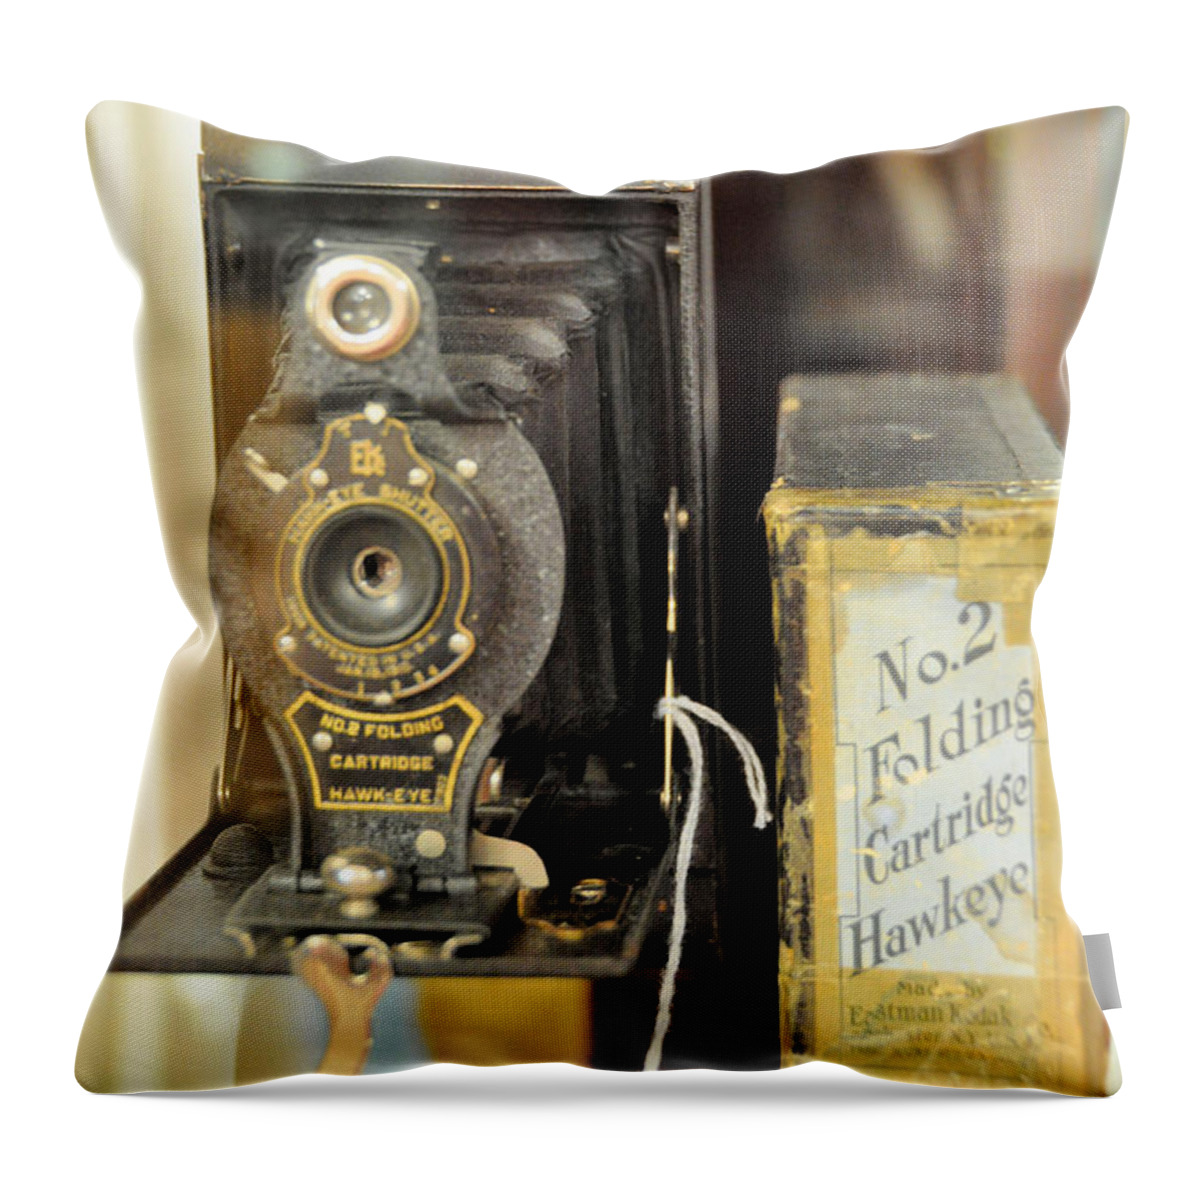 Still Life Throw Pillow featuring the photograph Hawkeye by Jan Amiss Photography